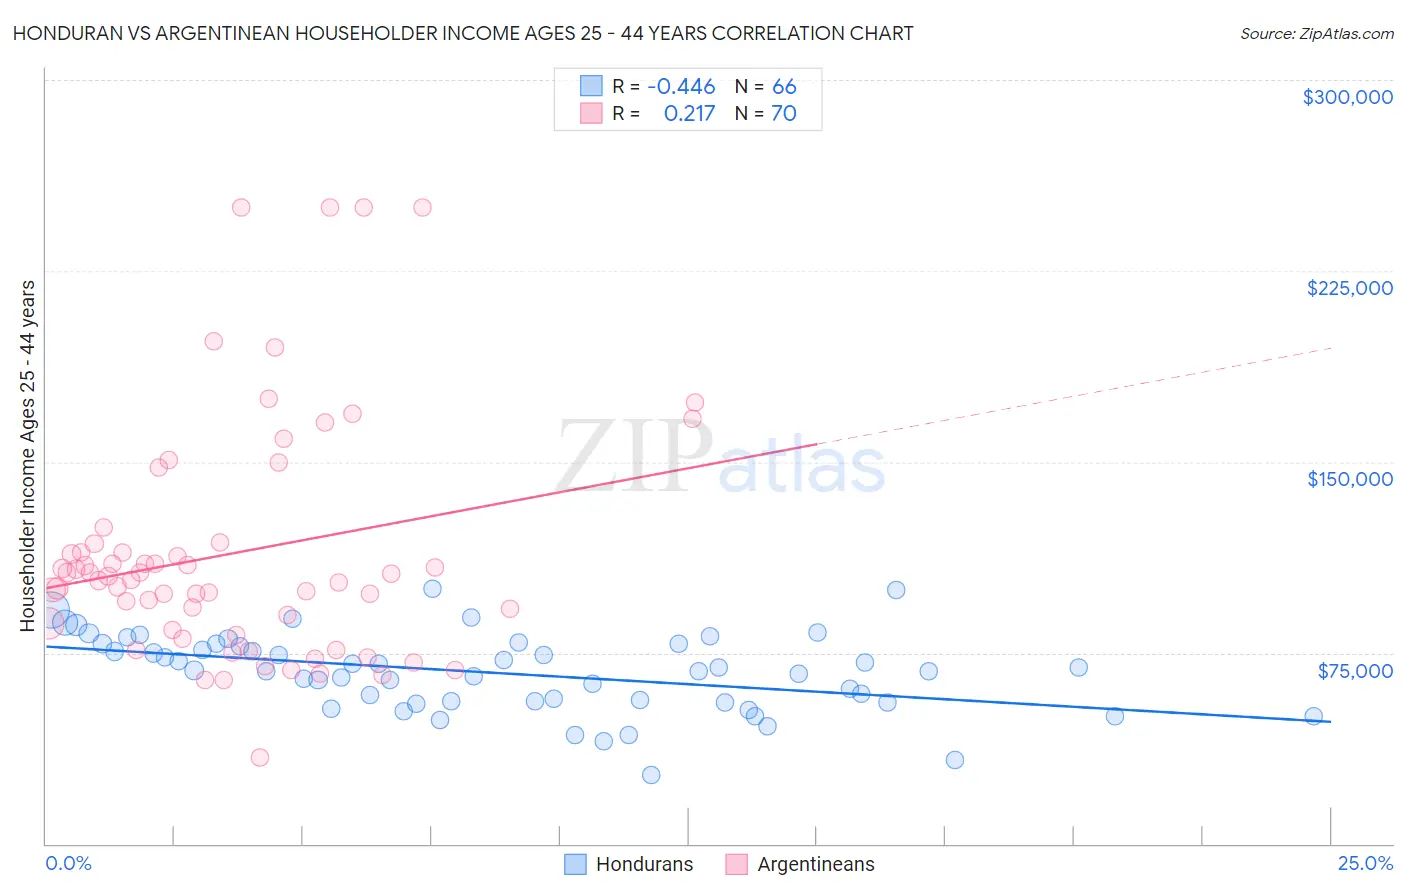 Honduran vs Argentinean Householder Income Ages 25 - 44 years